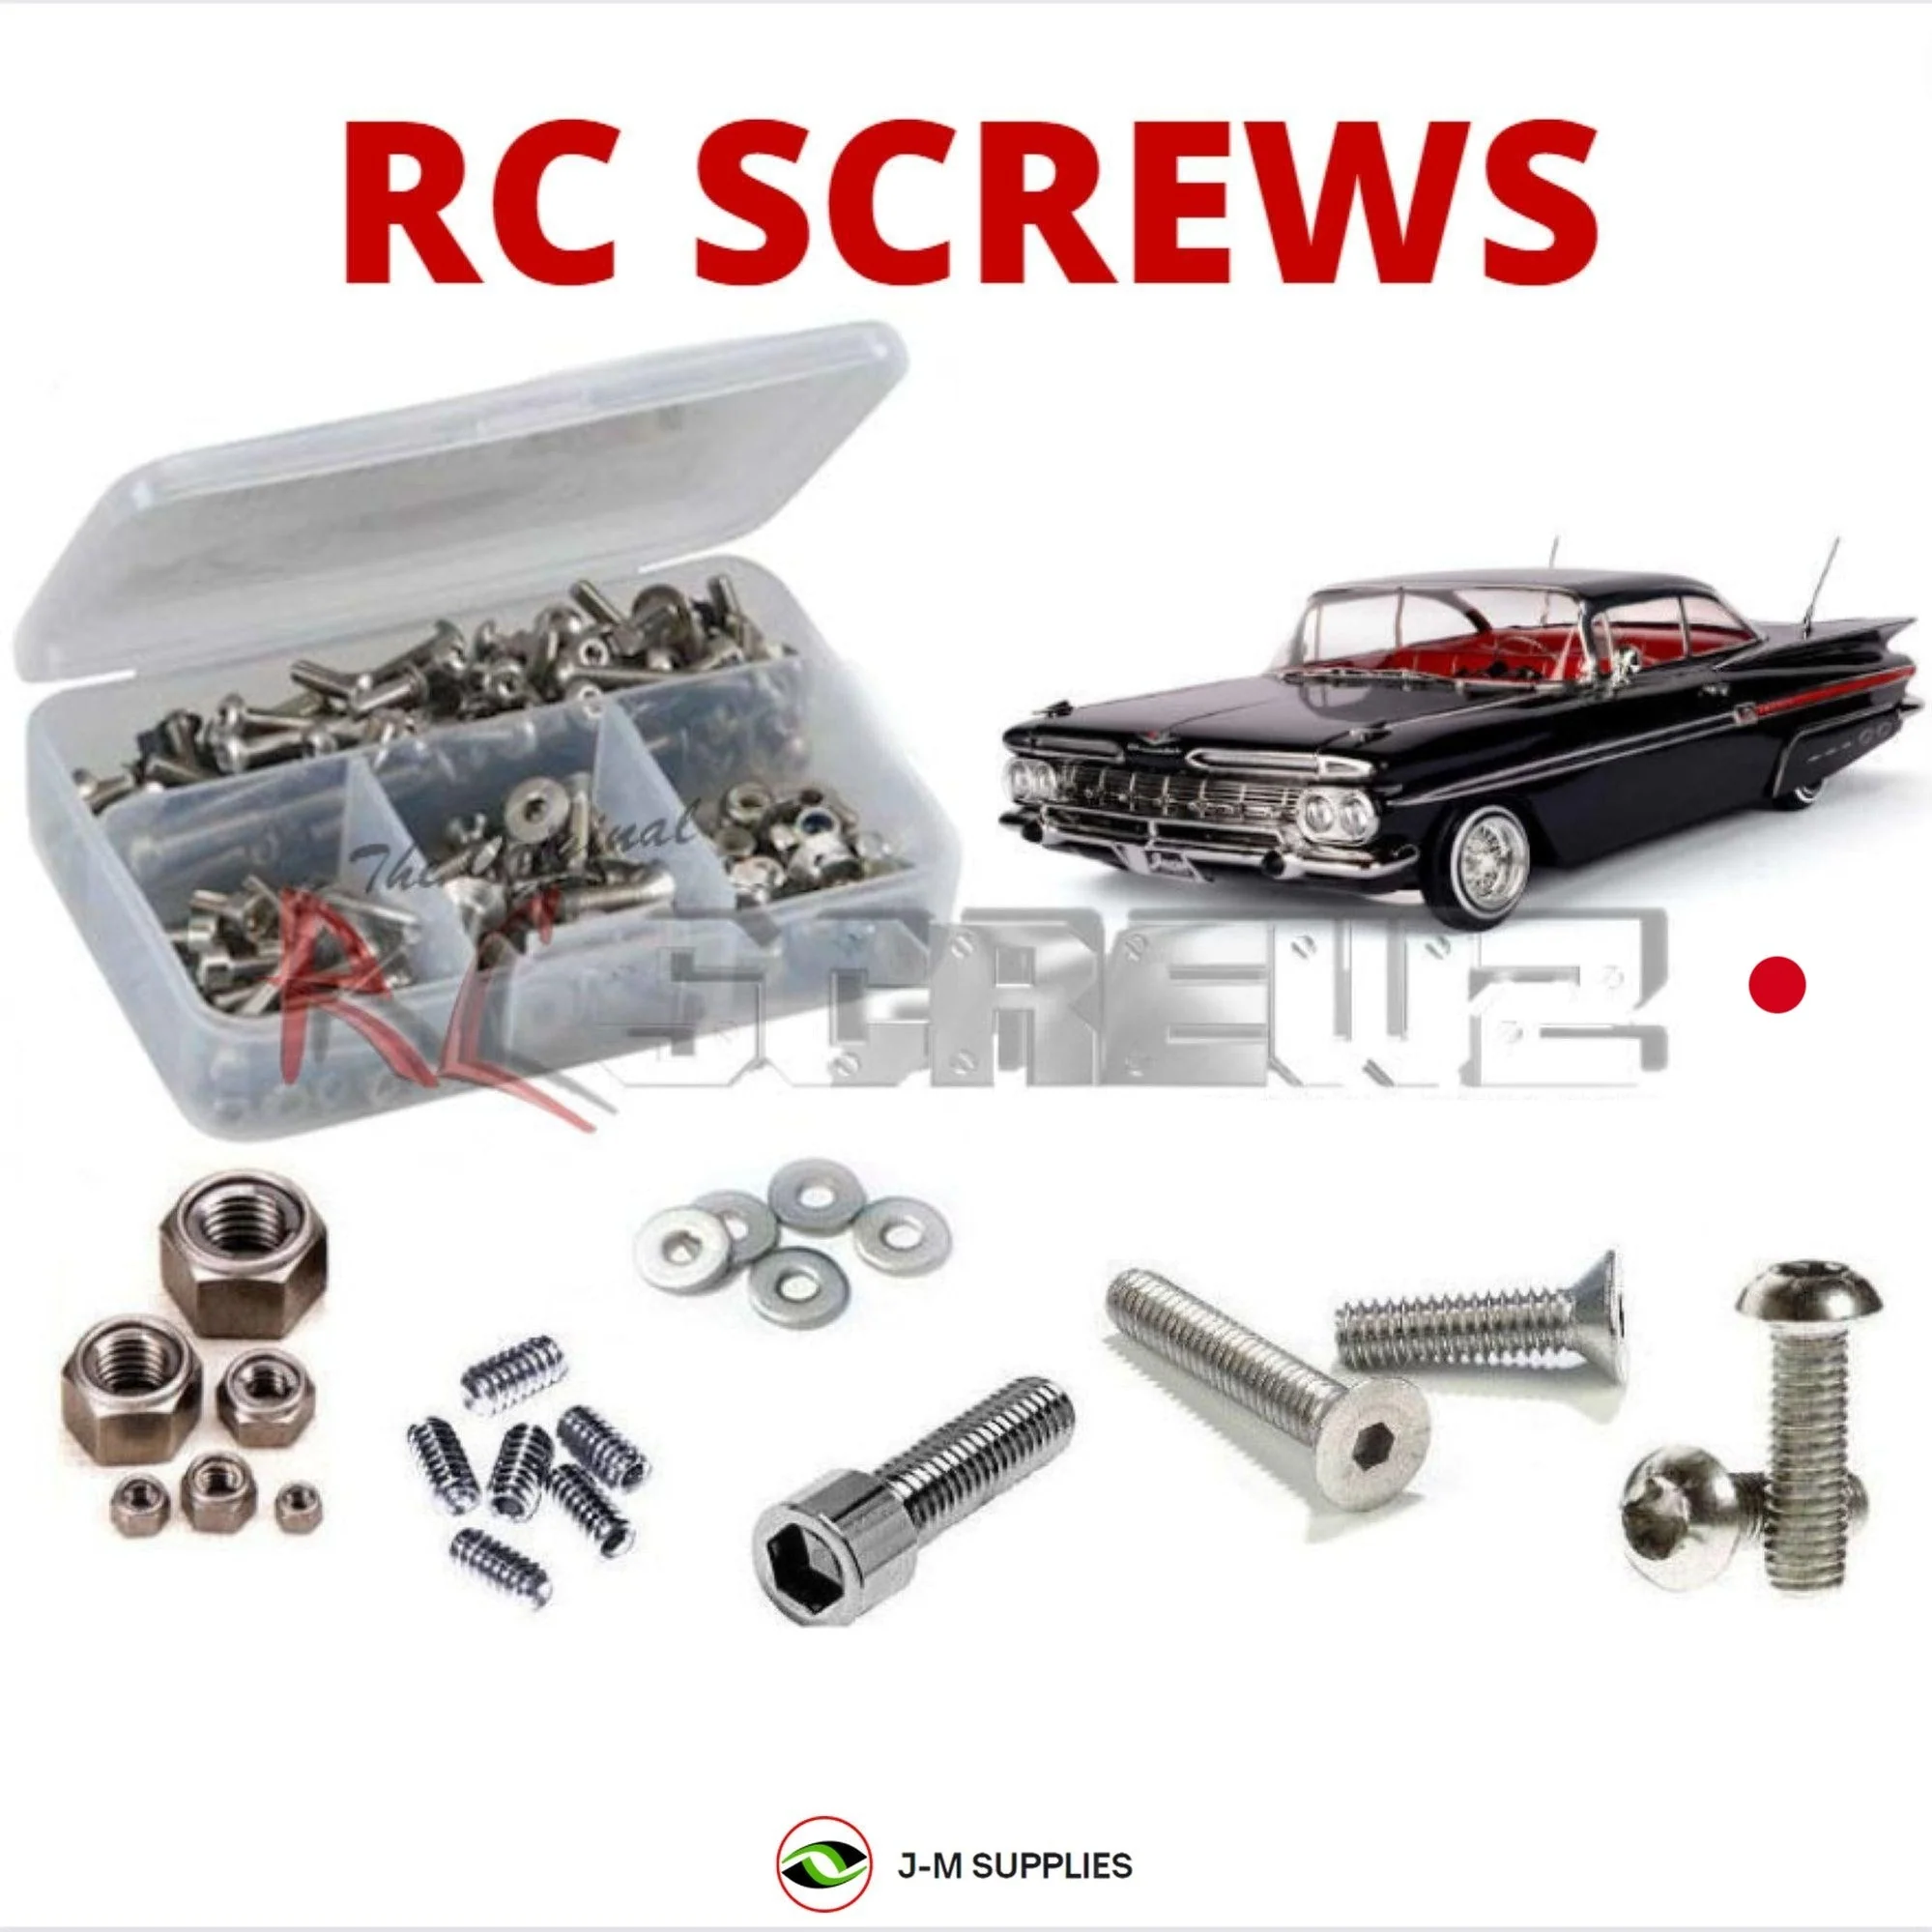 RCScrewZ Stainless Screw Kit rer077 for Redcat FiftyNine 1959 Impala Lowrider RC - Picture 1 of 12